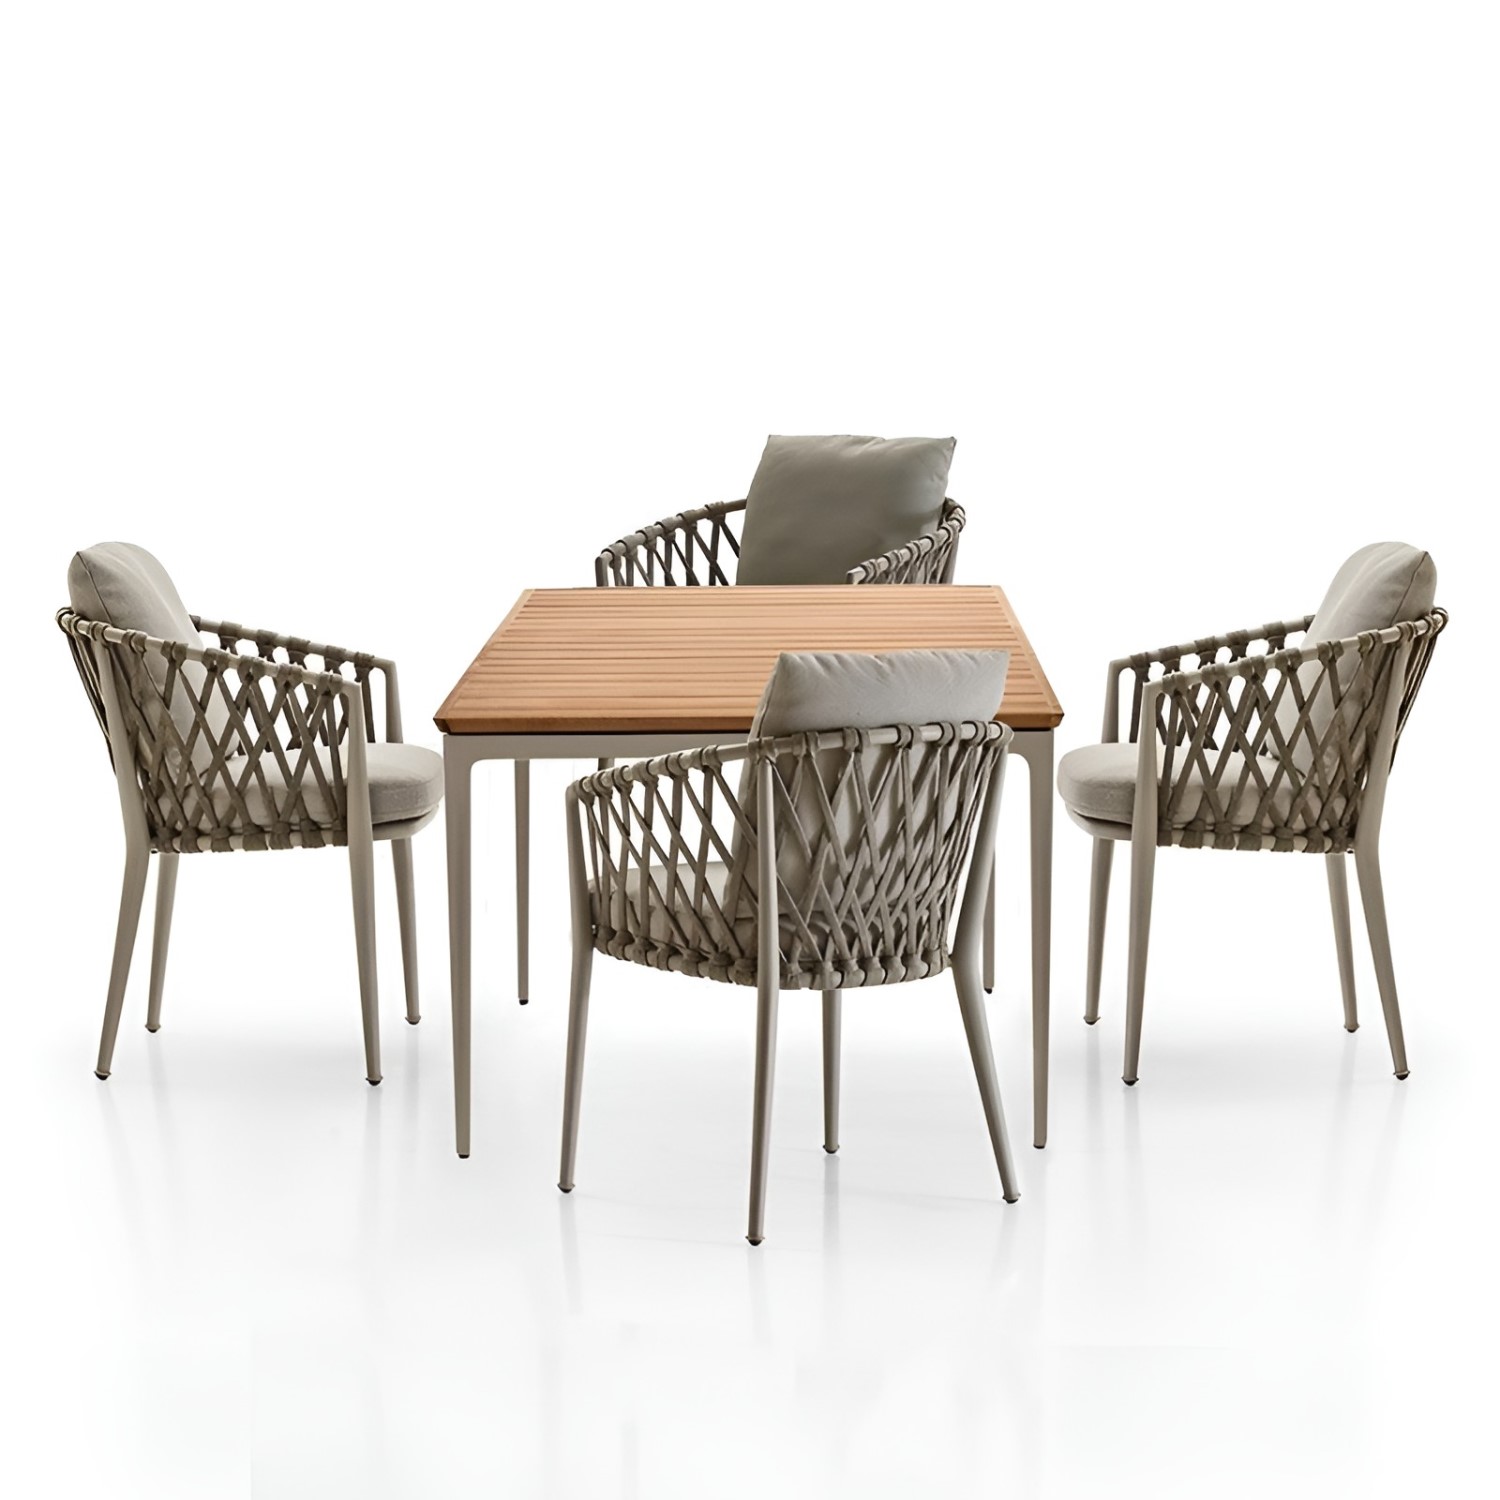 CZ014 Simple Design Outdoor Rope Weaving Dining Table Chair Set